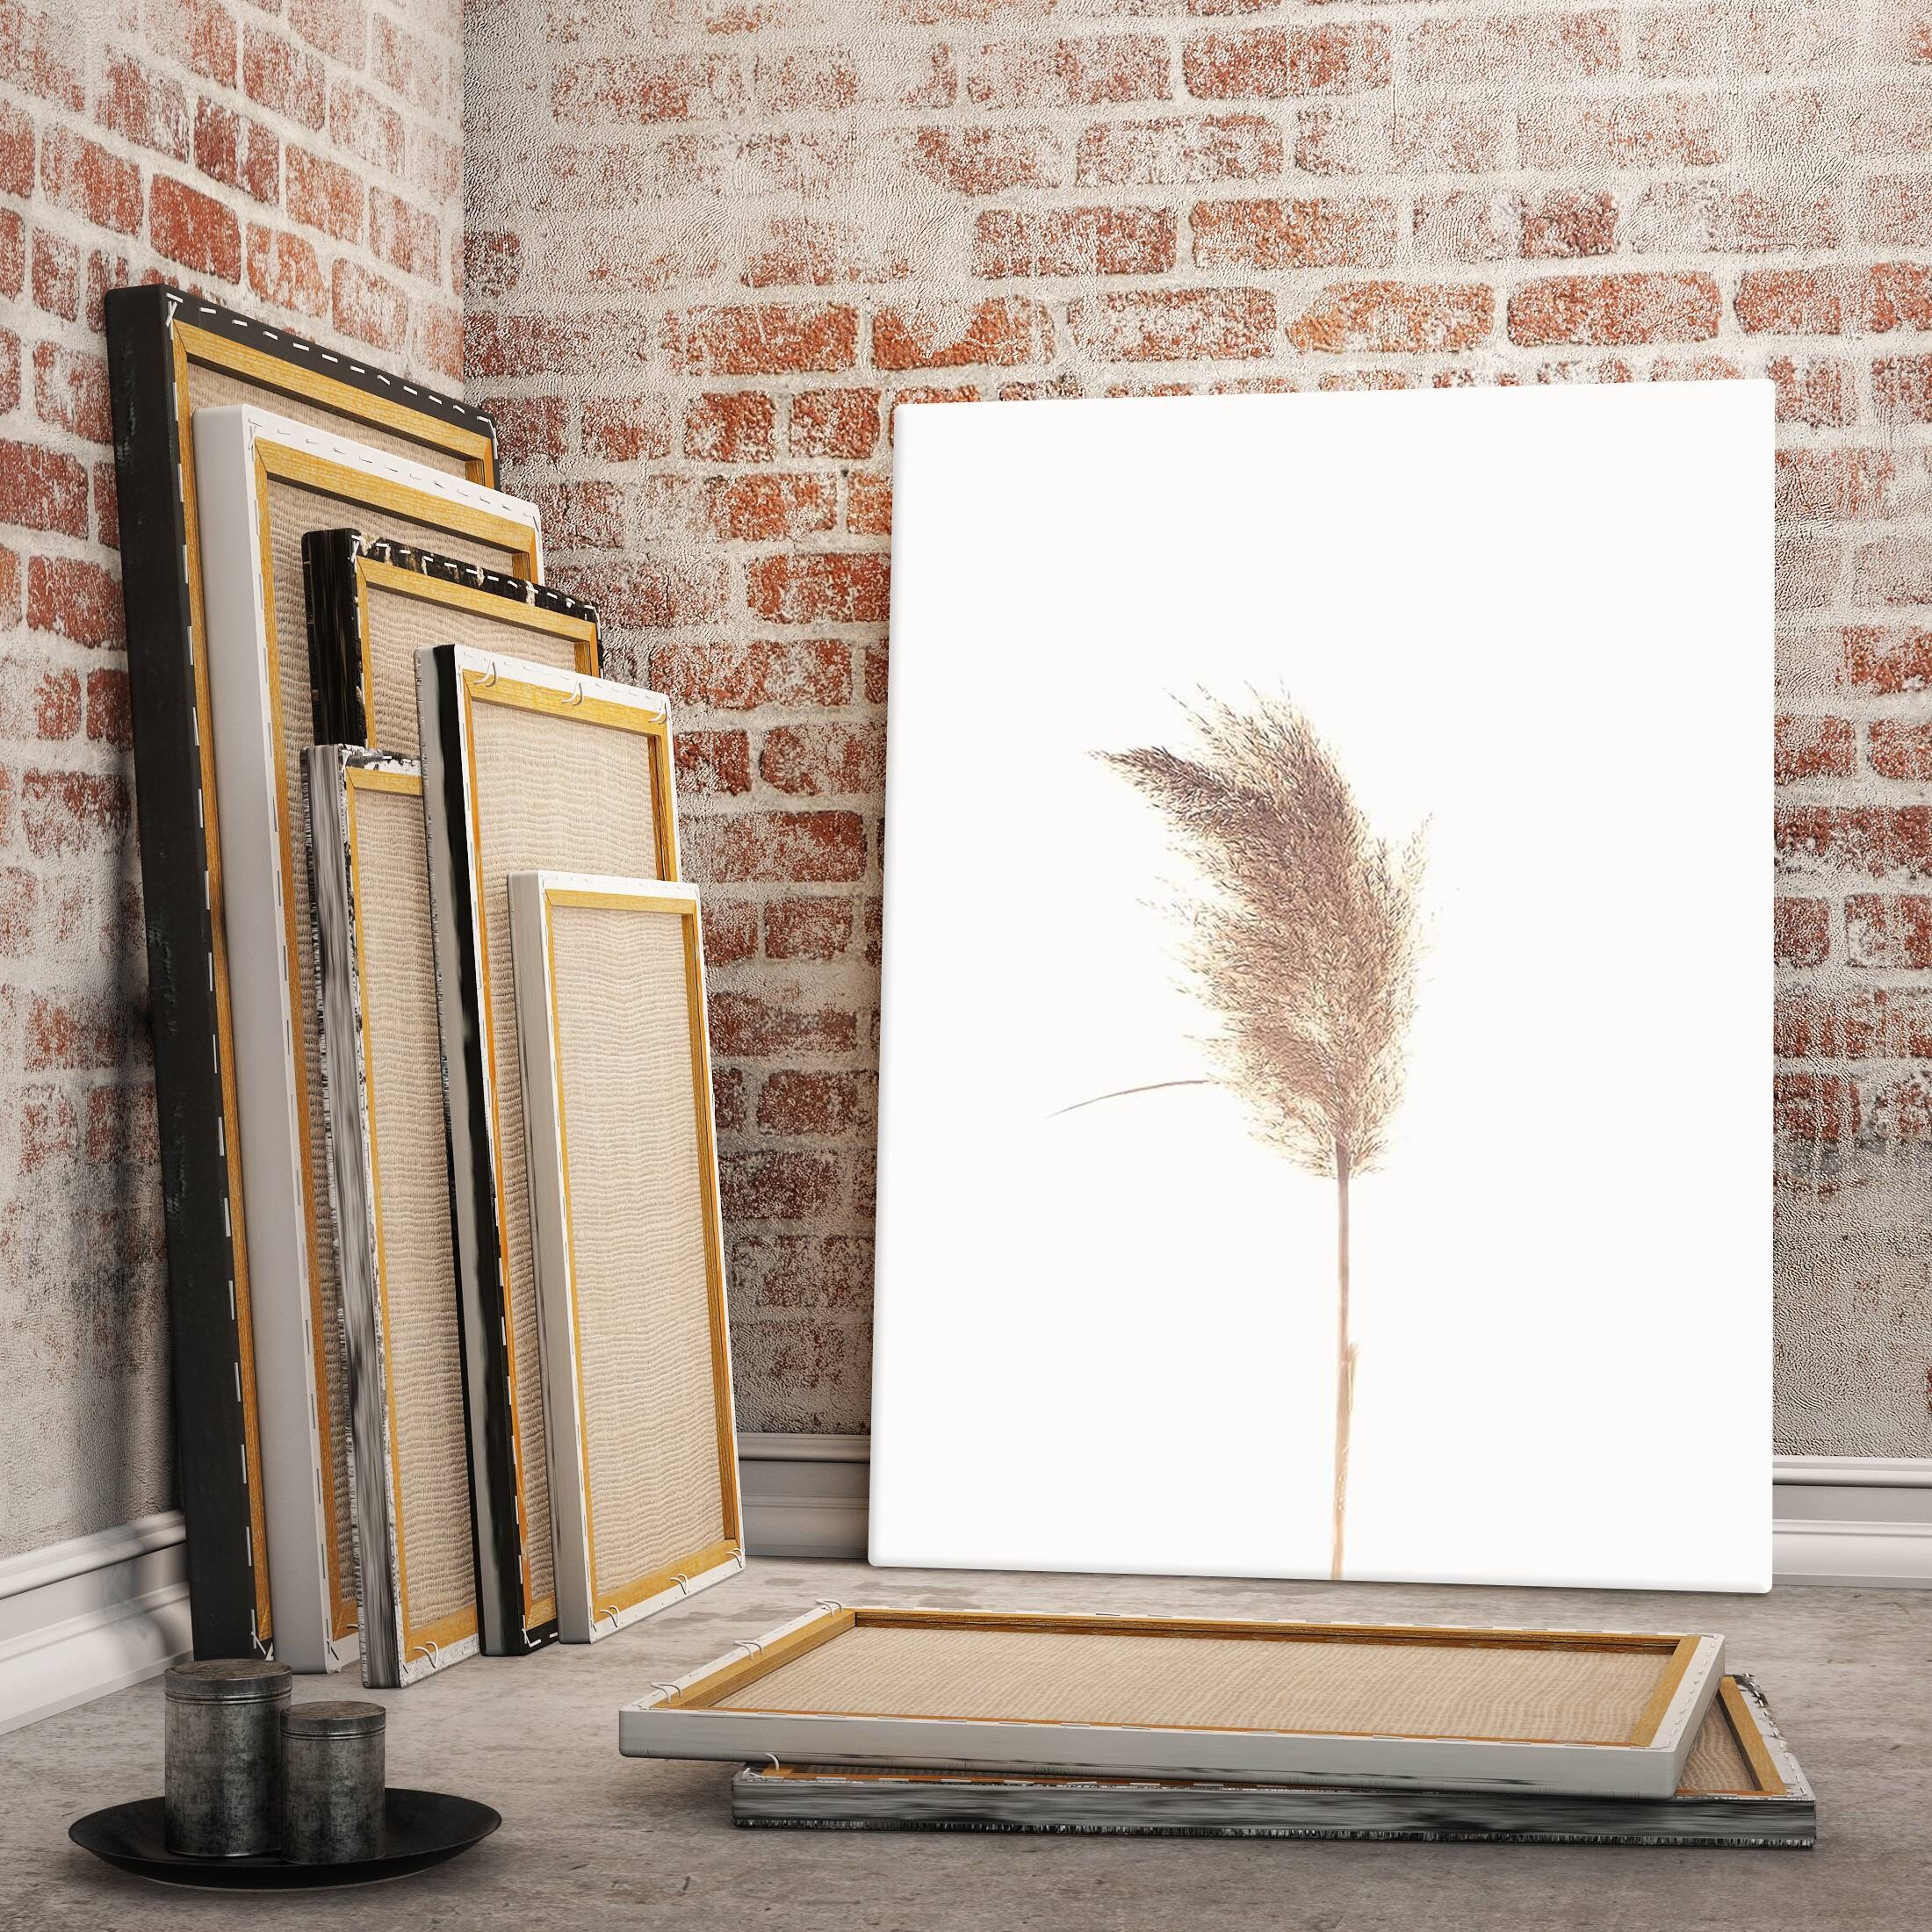 Canvas Painting Pampasgrass Brown Canvas on Stretcher Frame Pampas Grass  Mural Decorative Picture 70 Cm X 50 Cm 